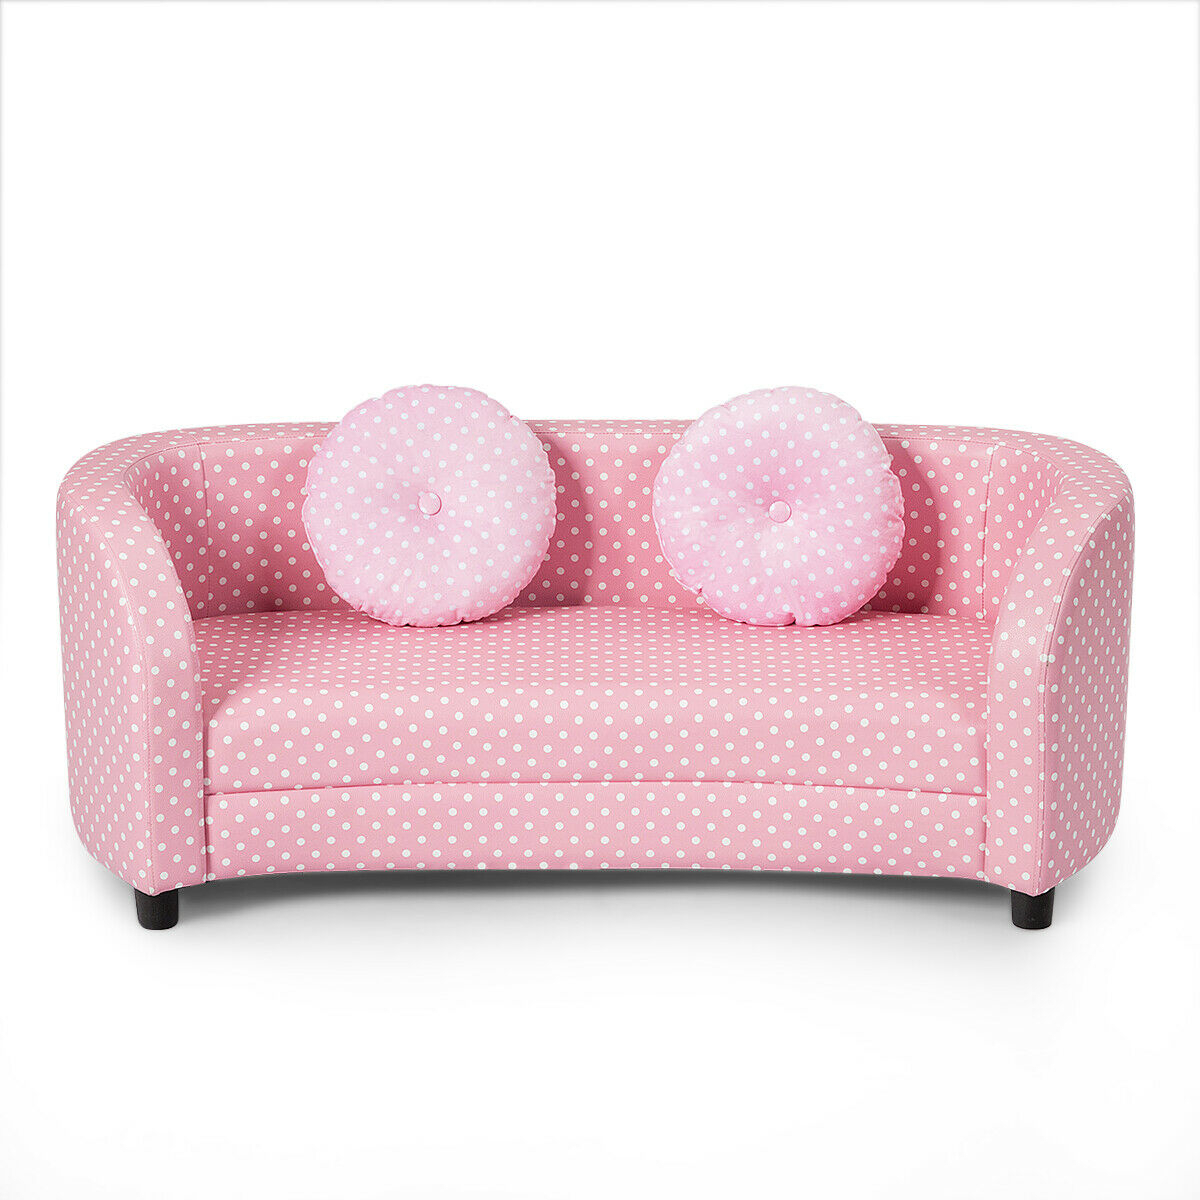 2 Seat Kids Sofa Armrest Chair With Two Cloth Pillows Perfect For Girls Pink